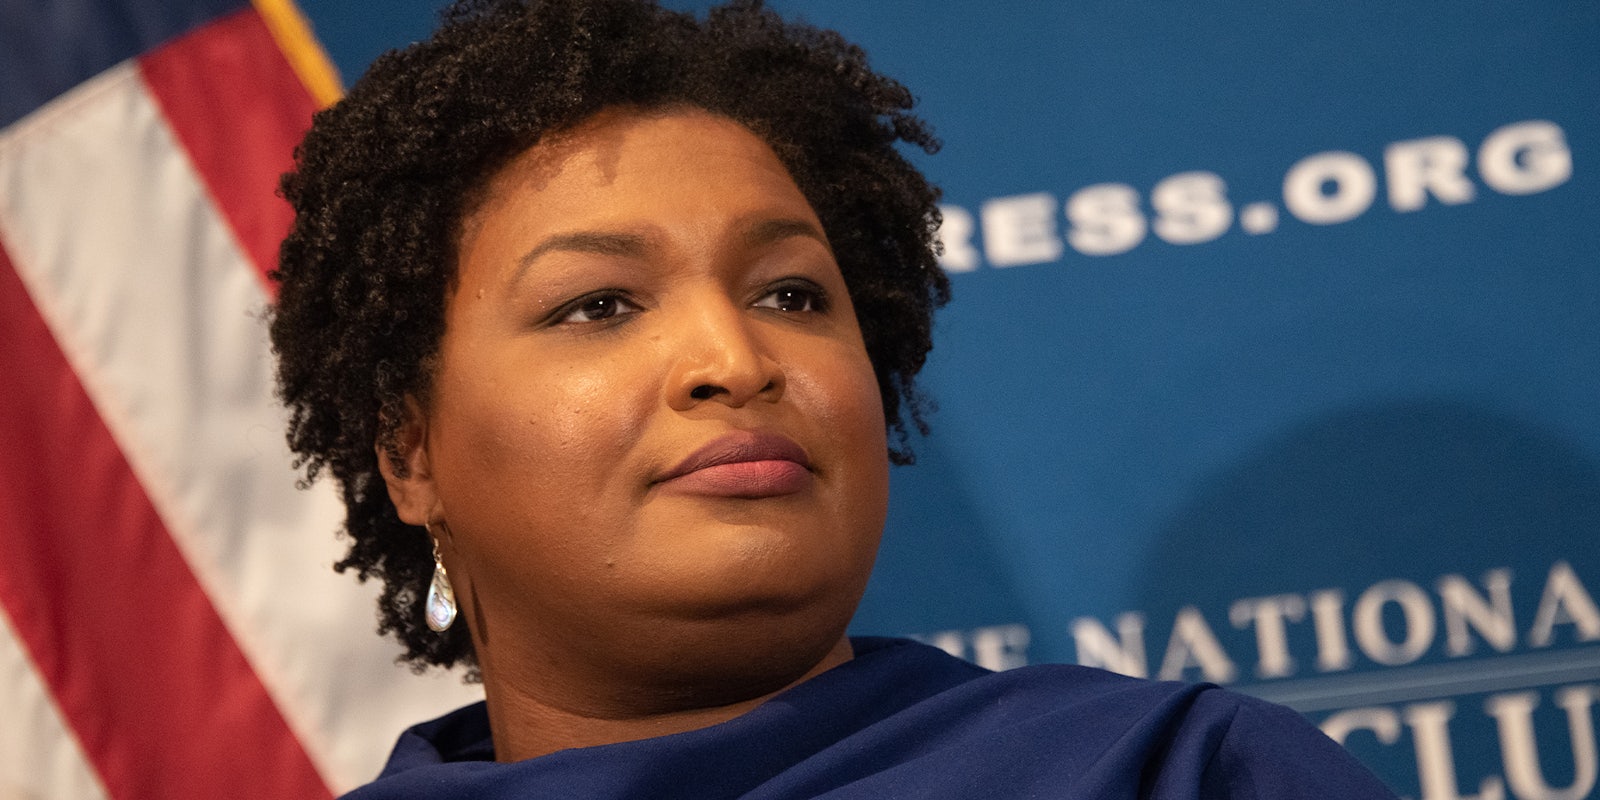 Stacey Abrams speaking, illustrating a story on Stacey Abrams books